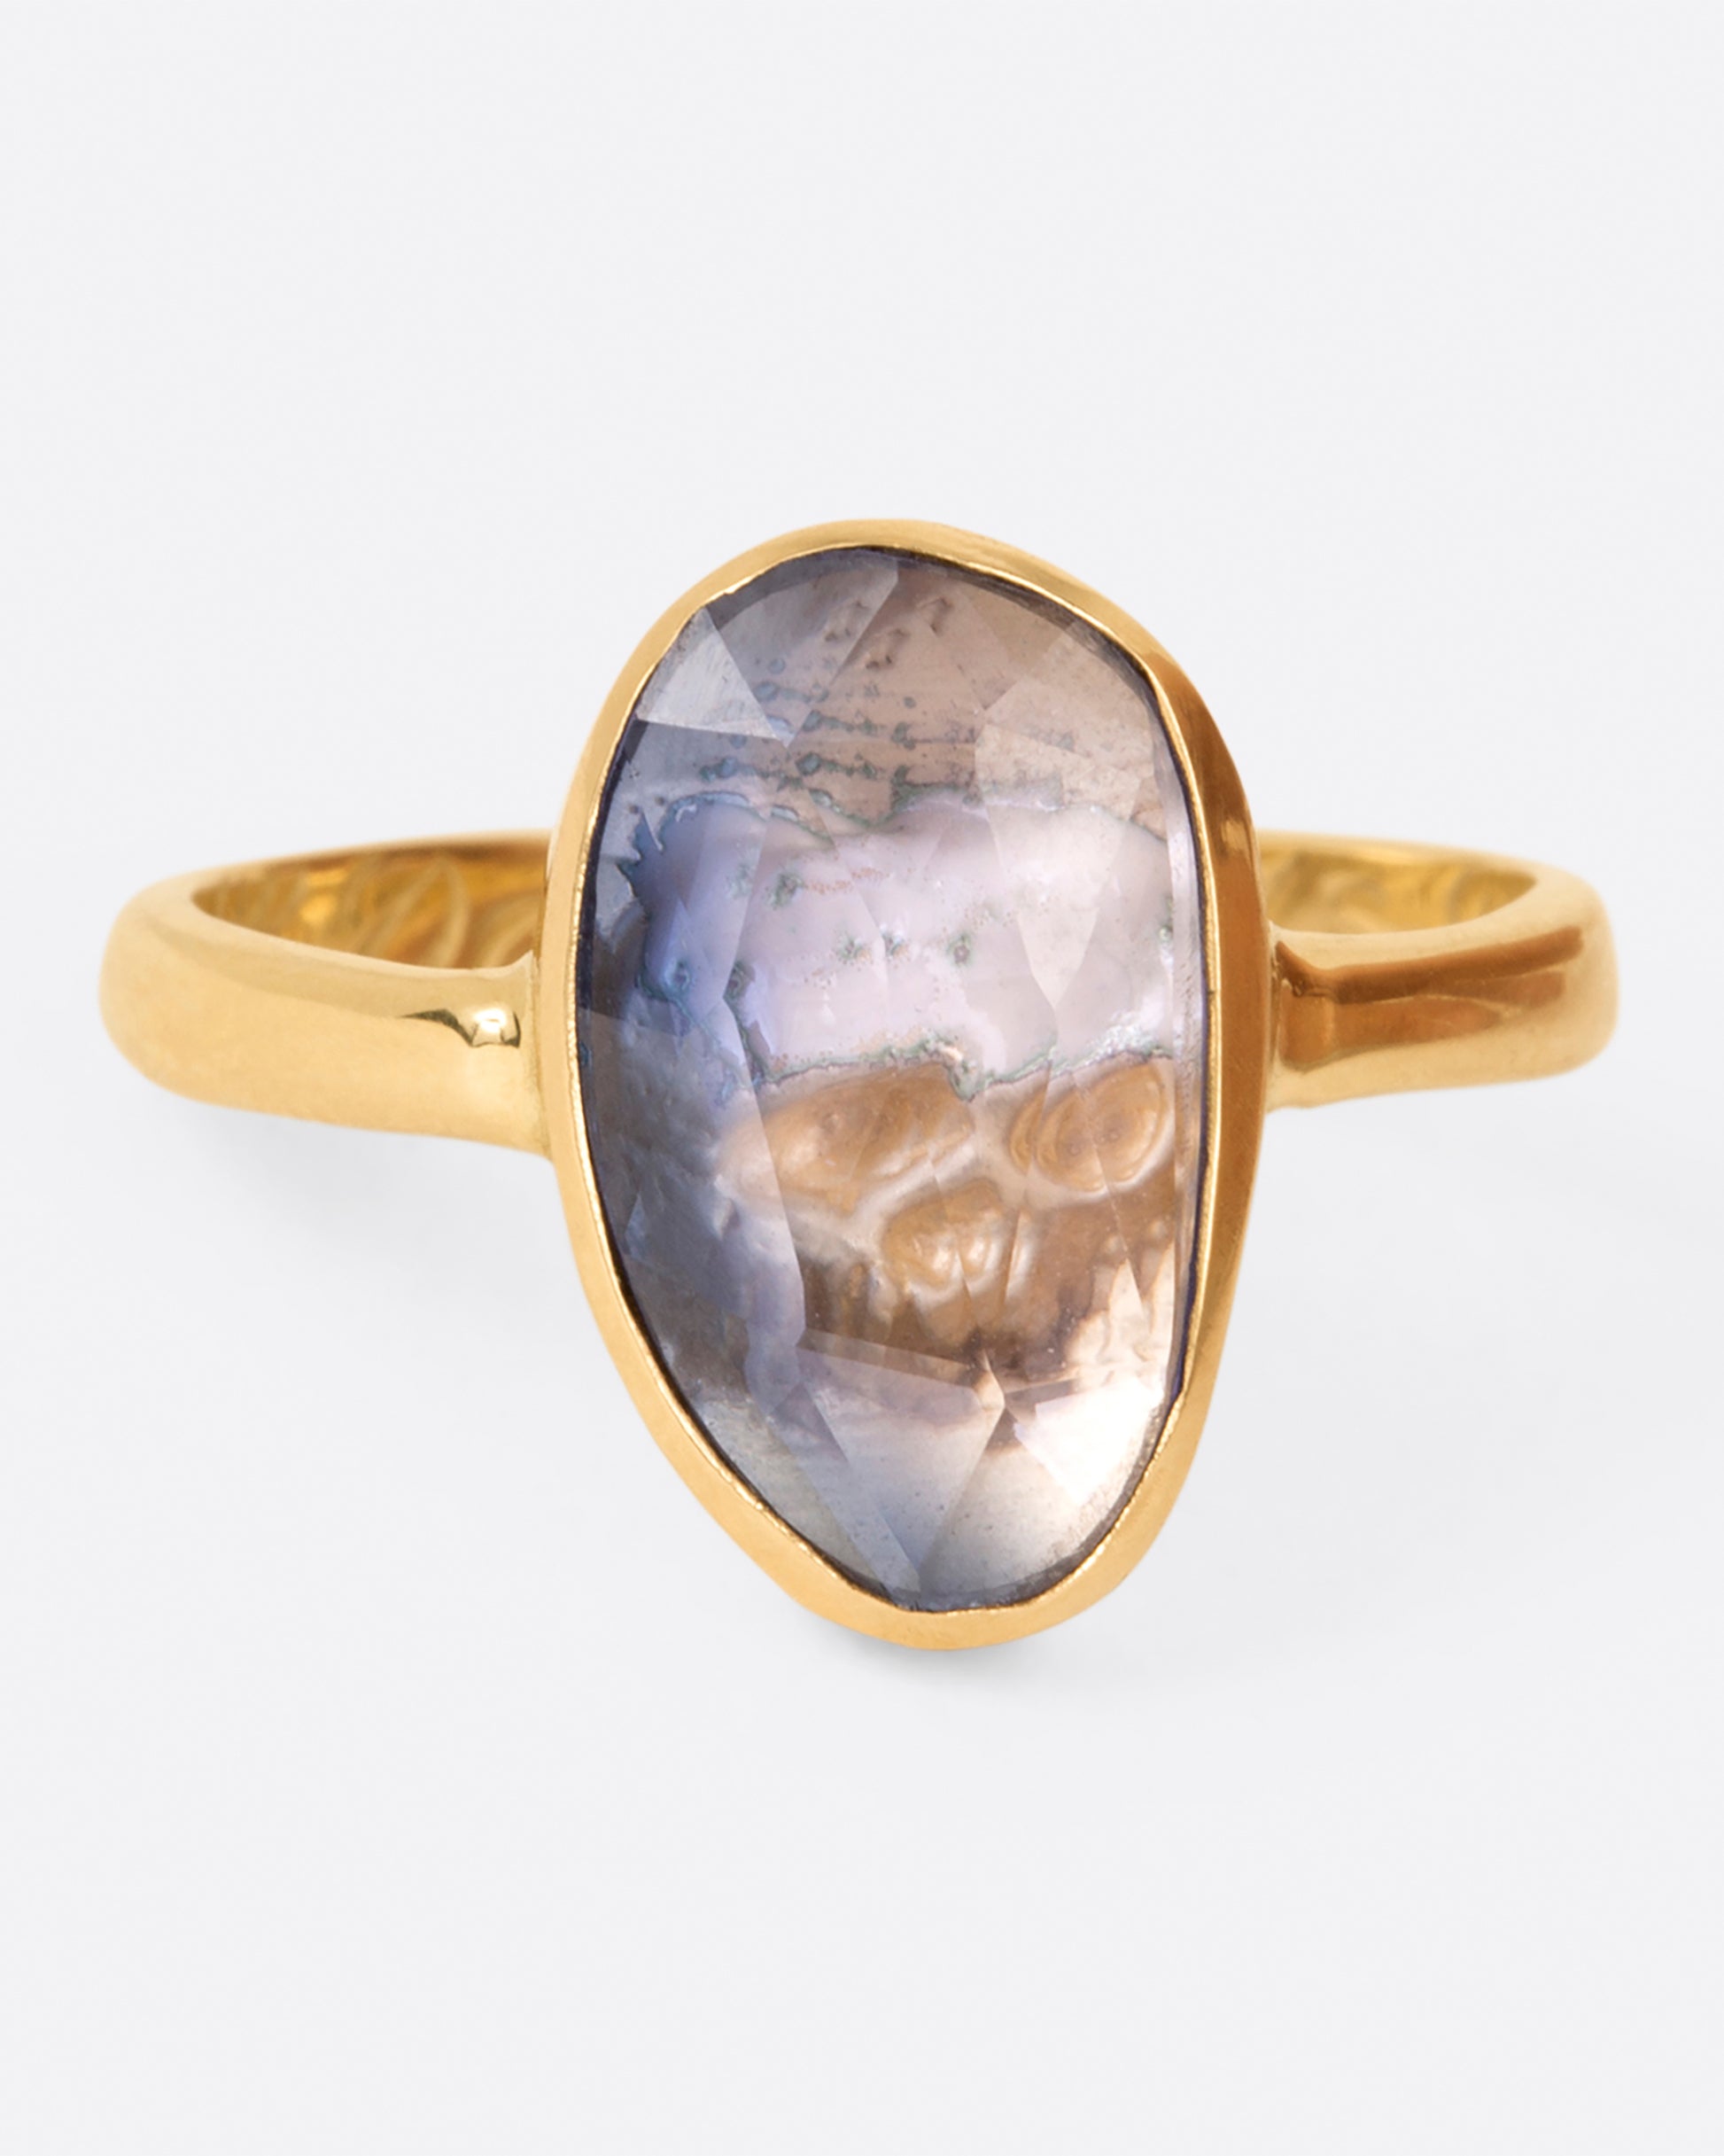 A ring featuring an oval rose cut blue sapphire with a carved skull behind it, shown from the front.